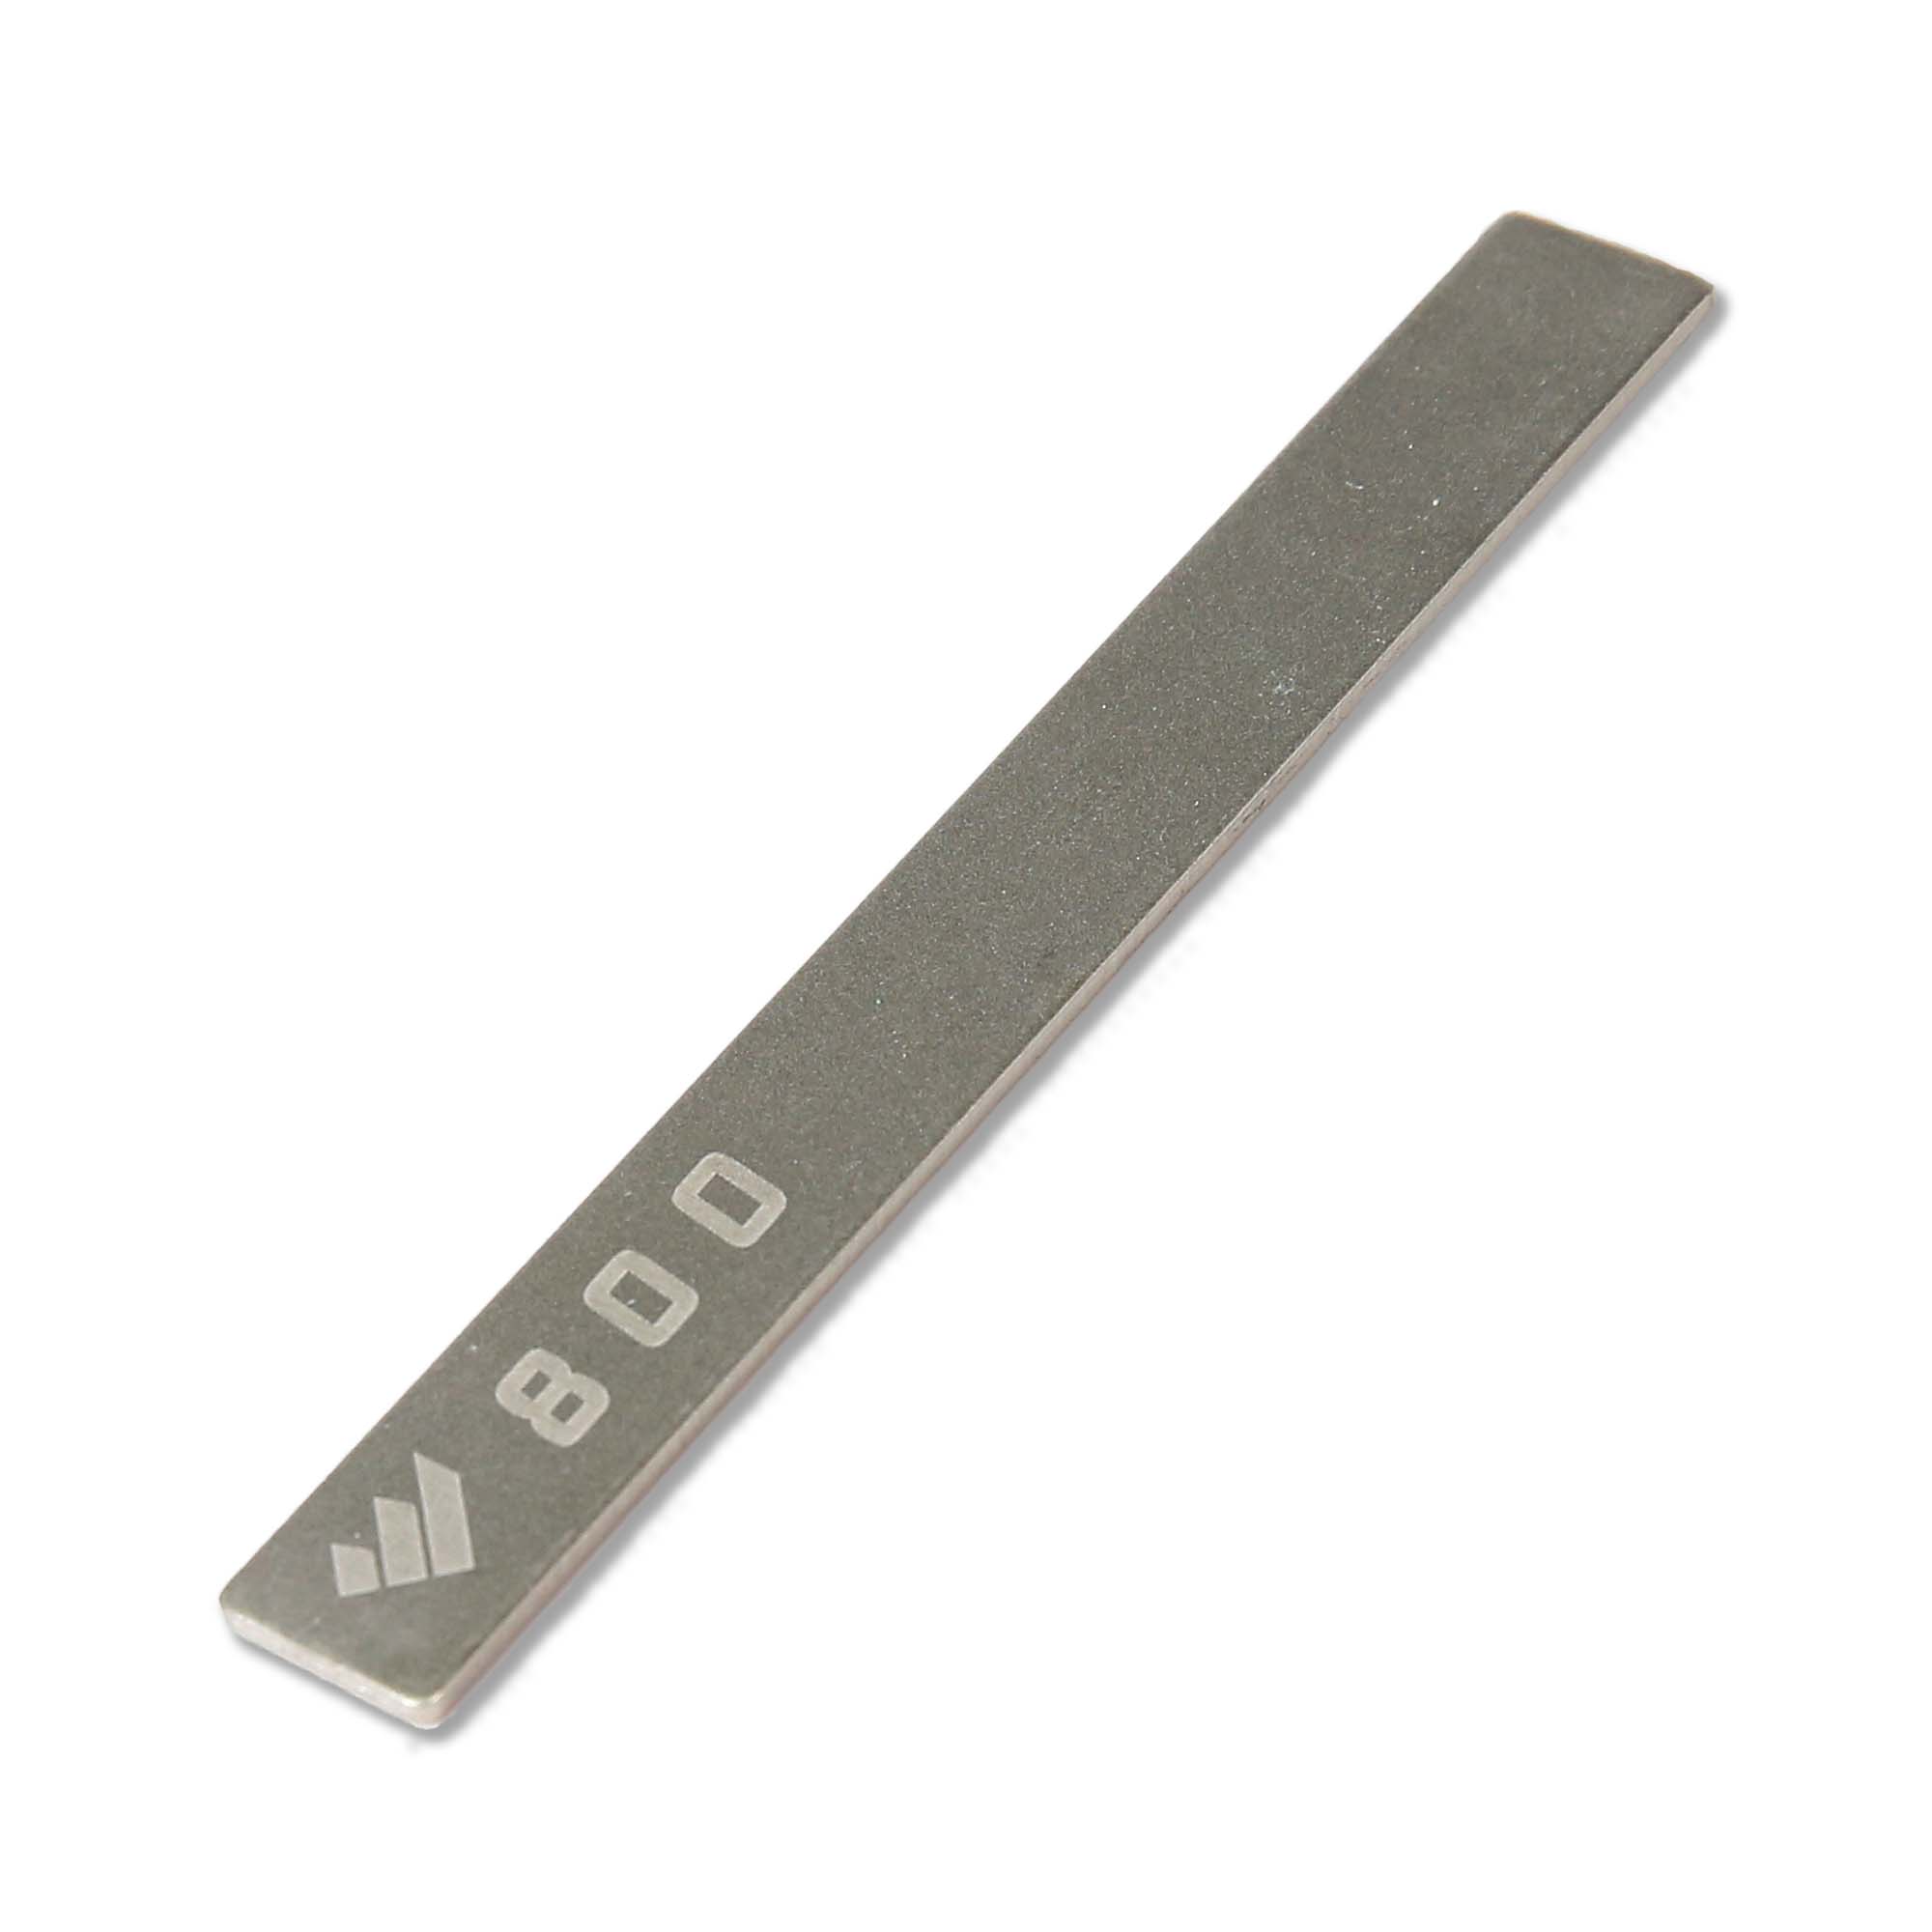 Replacement 800 Grit Plate for the Precision Adjust™